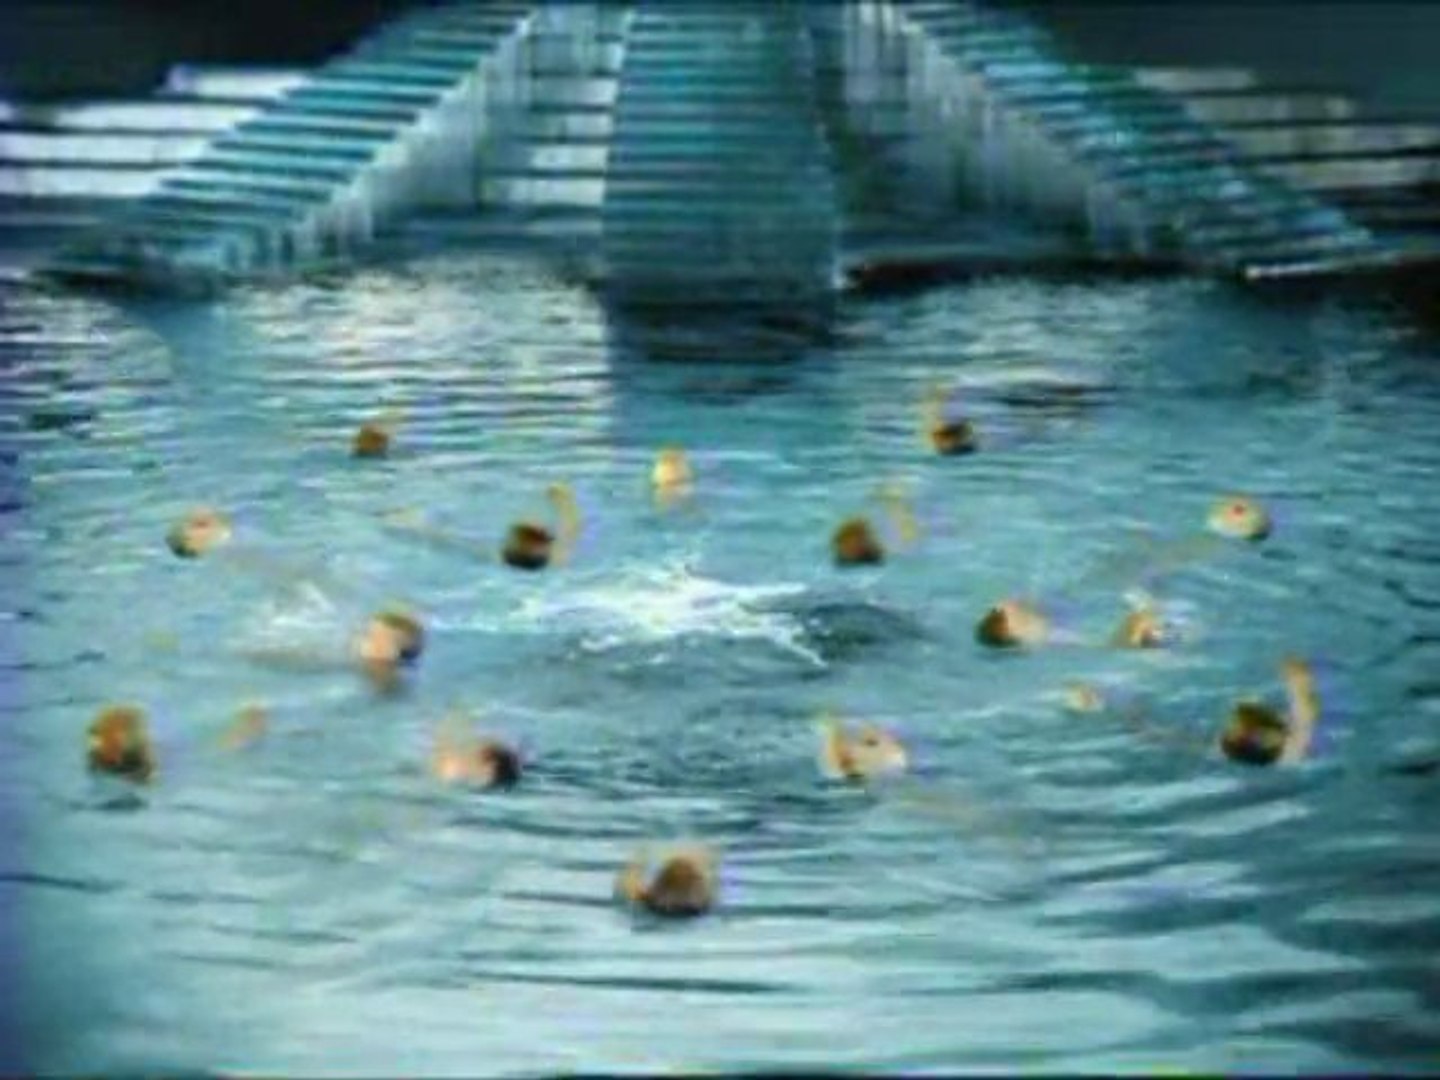 Publicite Evian Natation Synchro Avec Les Bebes Bye Bye Baby 01 Video Dailymotion